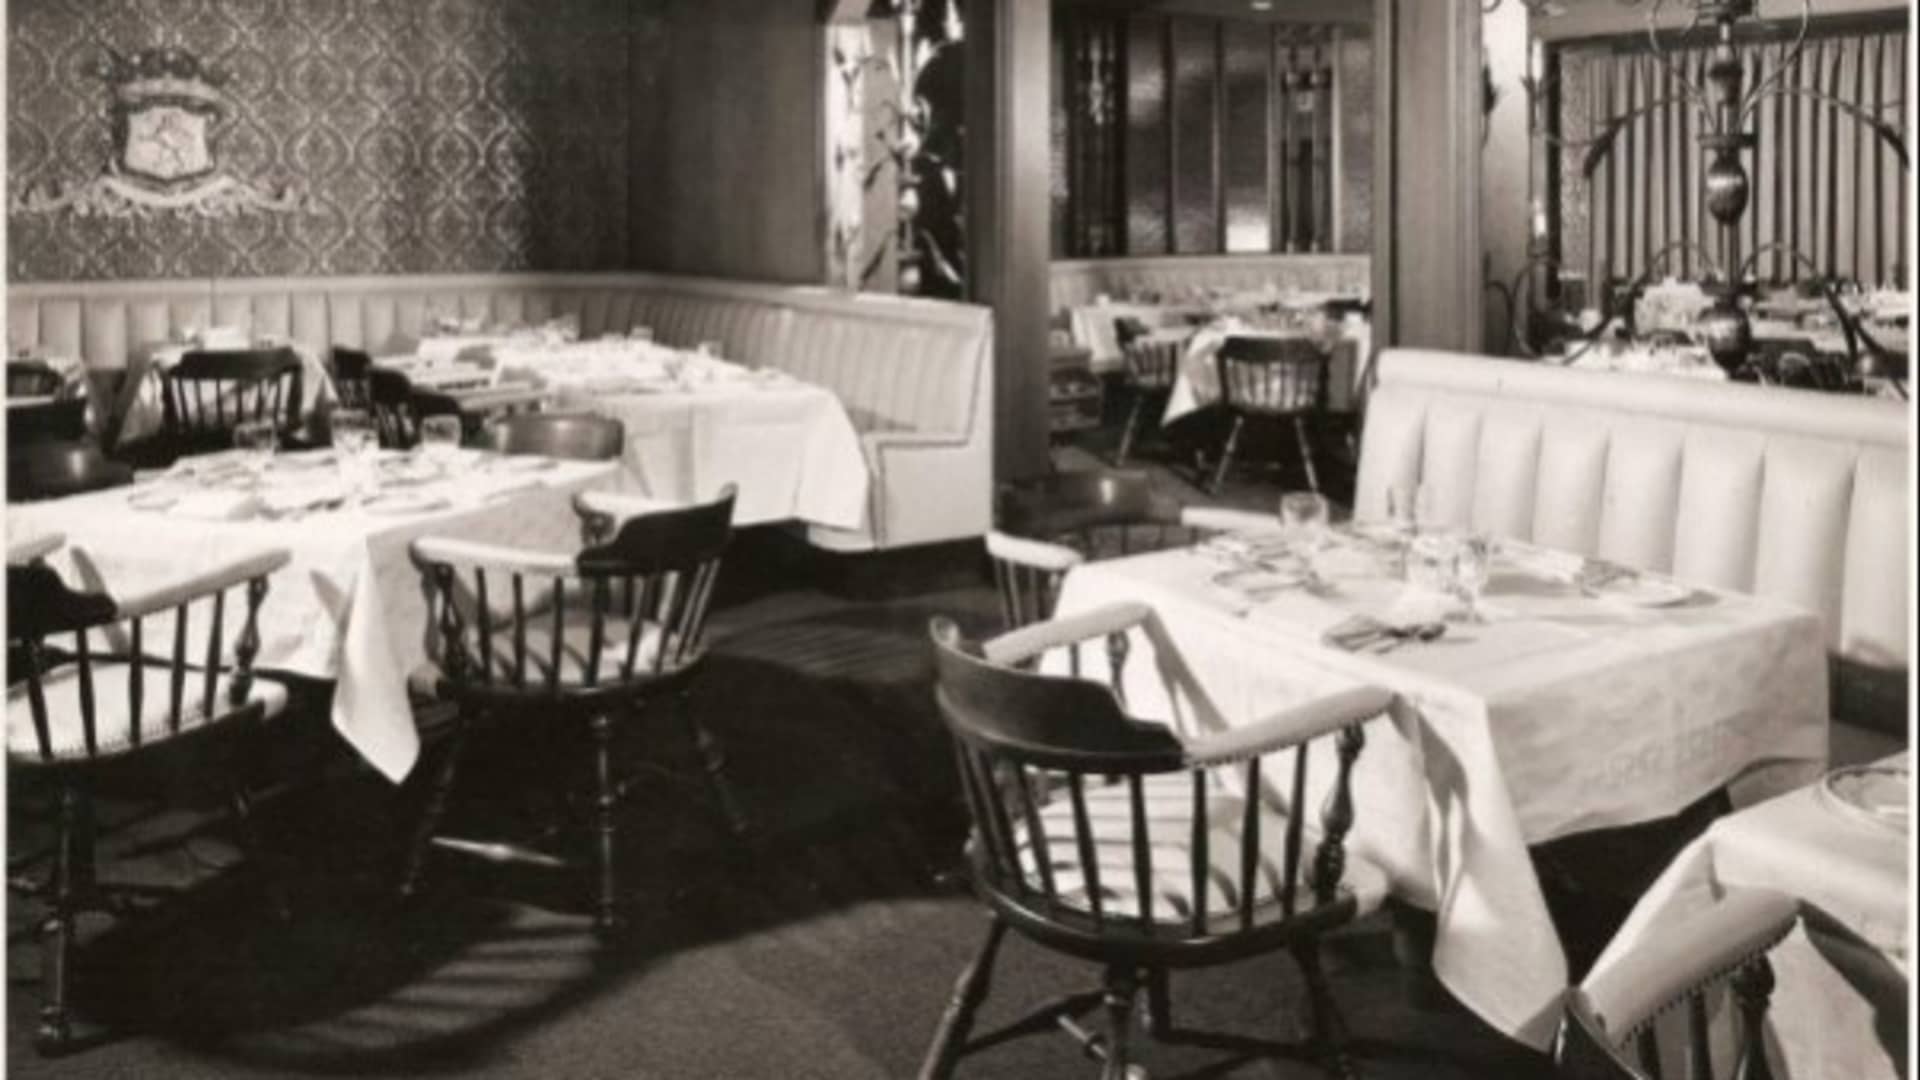 The Hillsdale Inn was a revered Silicon Valley honeymoon hot spot decked out with high-end charm.